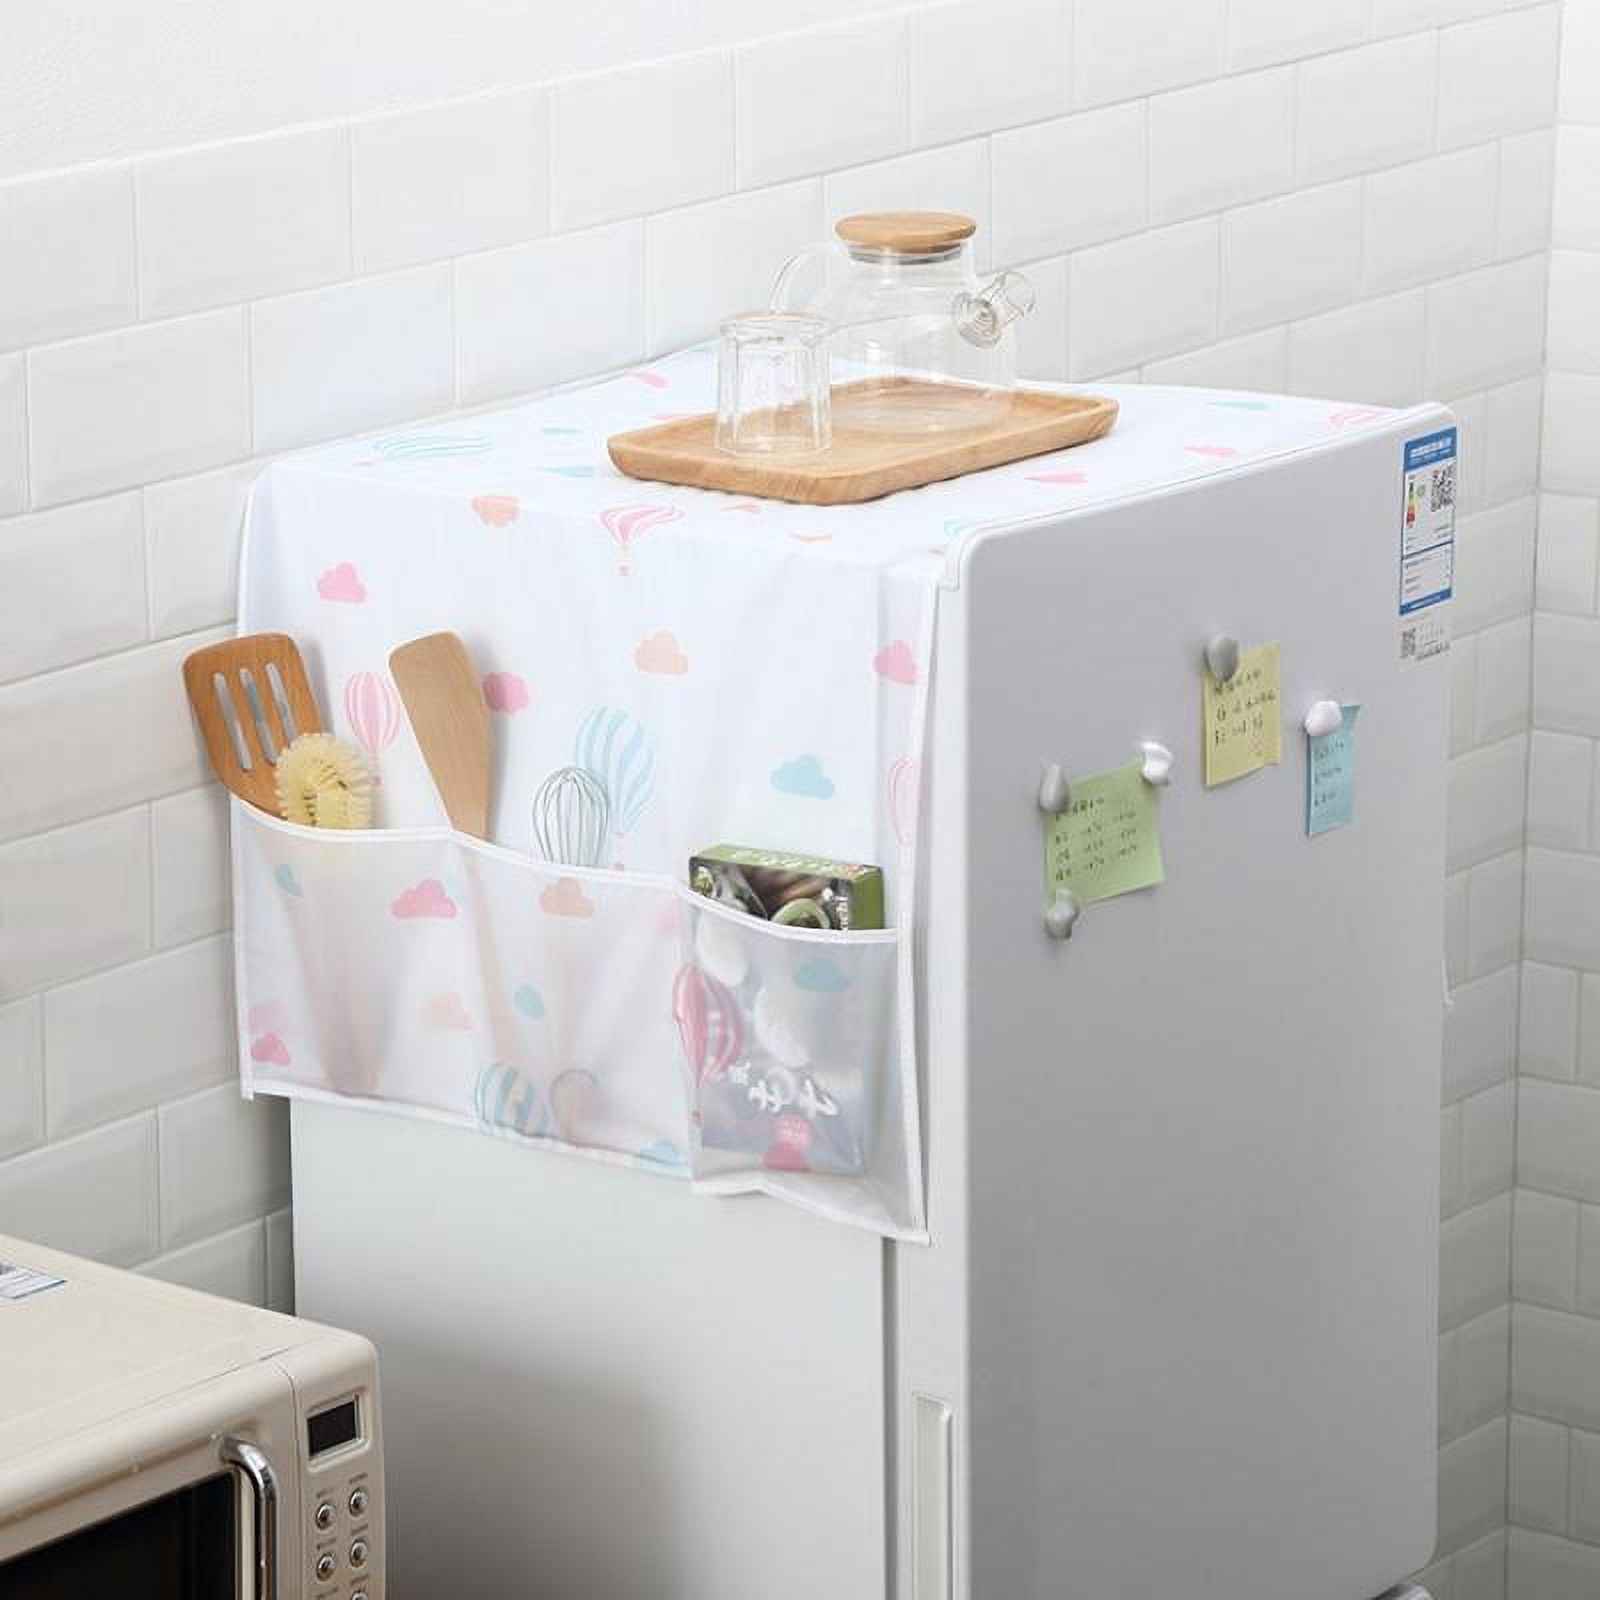 Dryer Top Protector Mat Freezer Mini Fridge Washer and Dryer Dust Rail  Handle Covers for The Top Washable Pink stripes 55 X 140cm